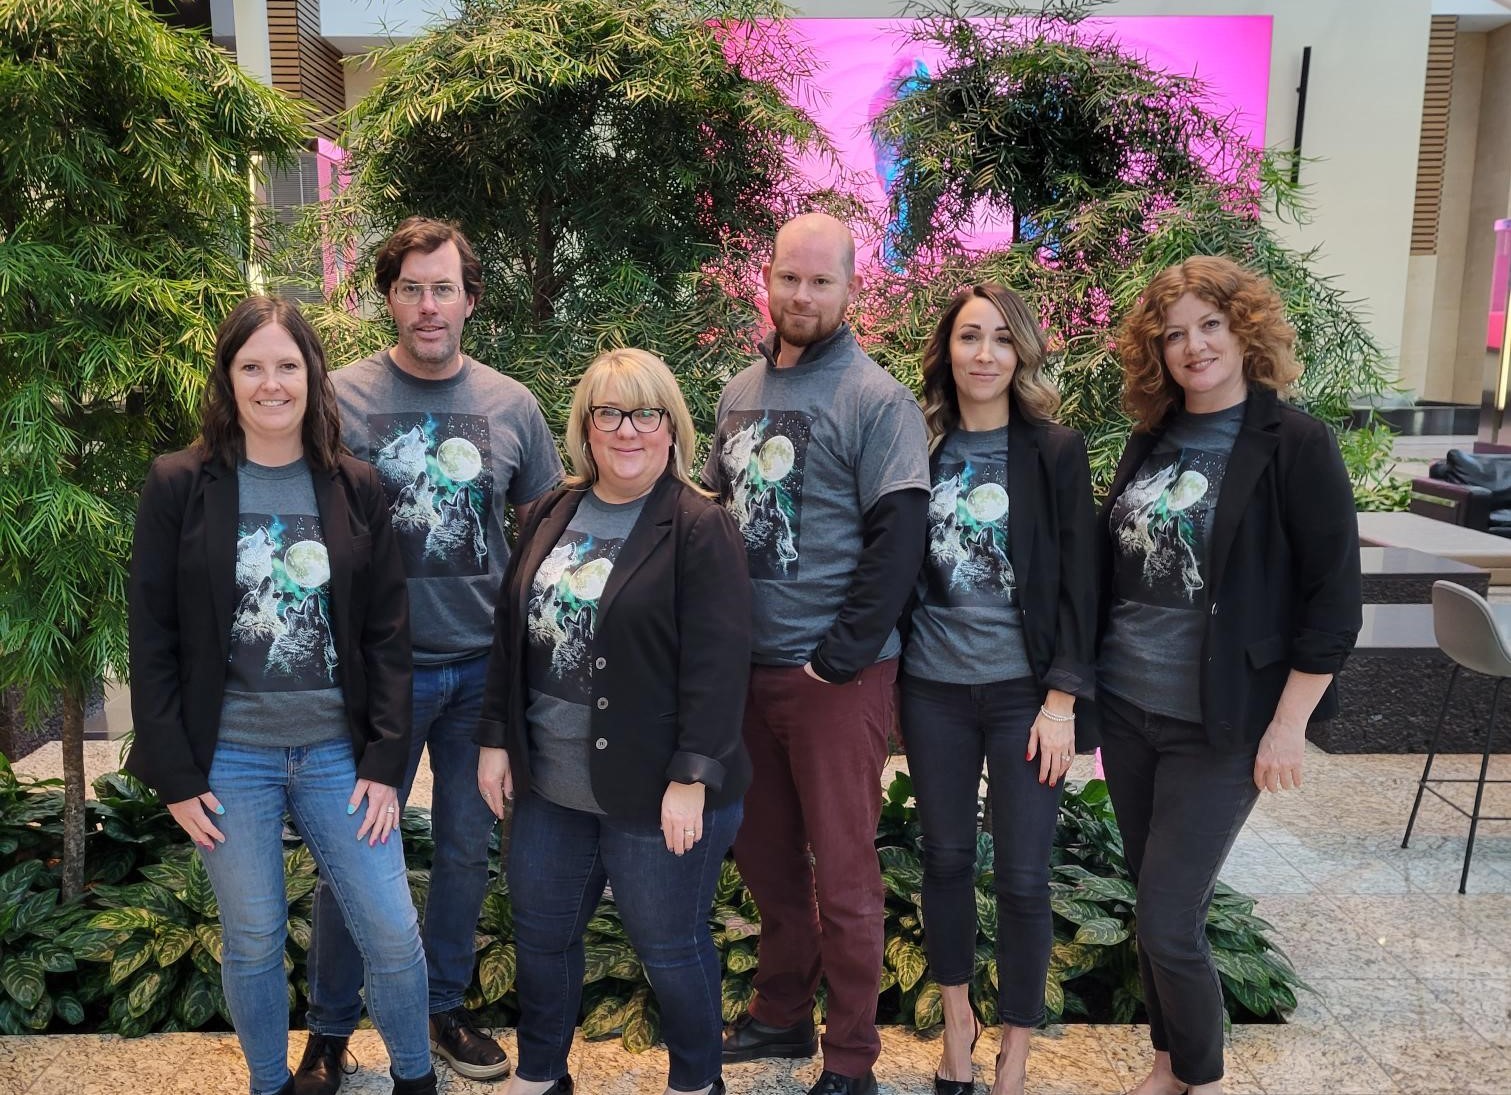 The Land Department team posing together wearing matching tee shirts of a wolf howling at the moon